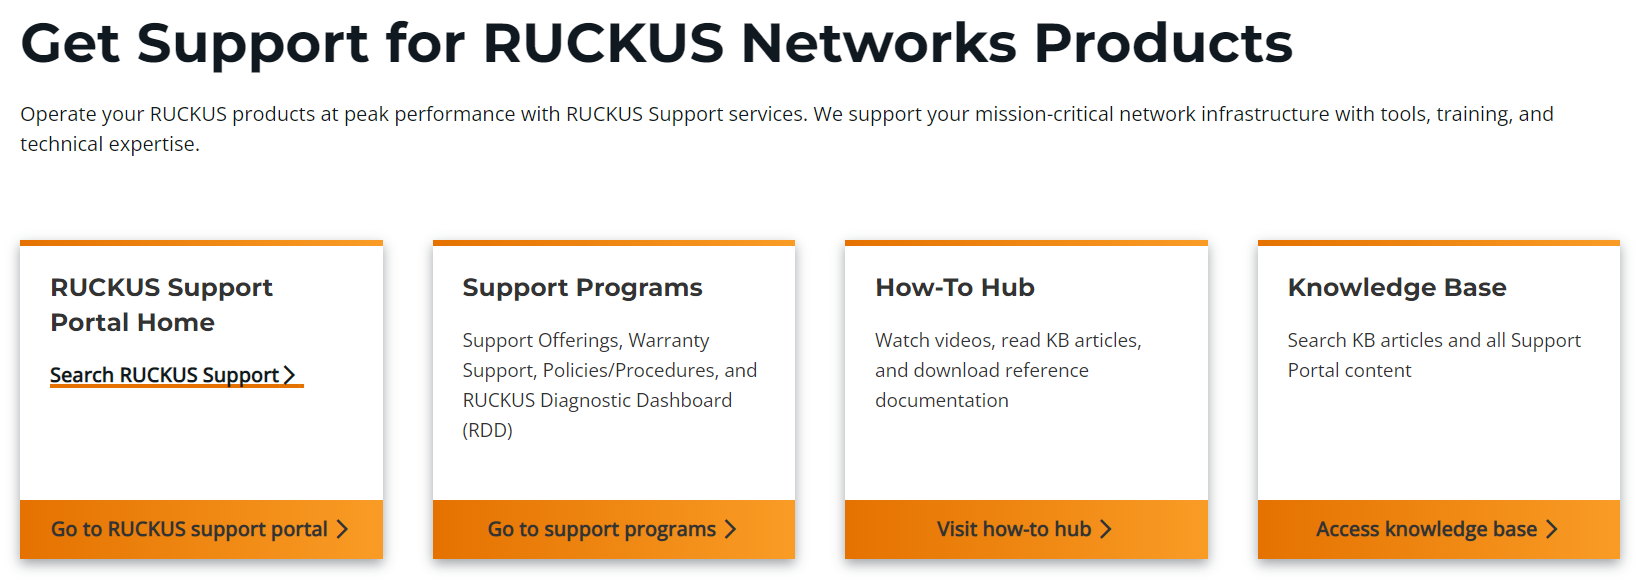 RUCKUS Support Main page showing access to the portal, info about support programs, and other information.